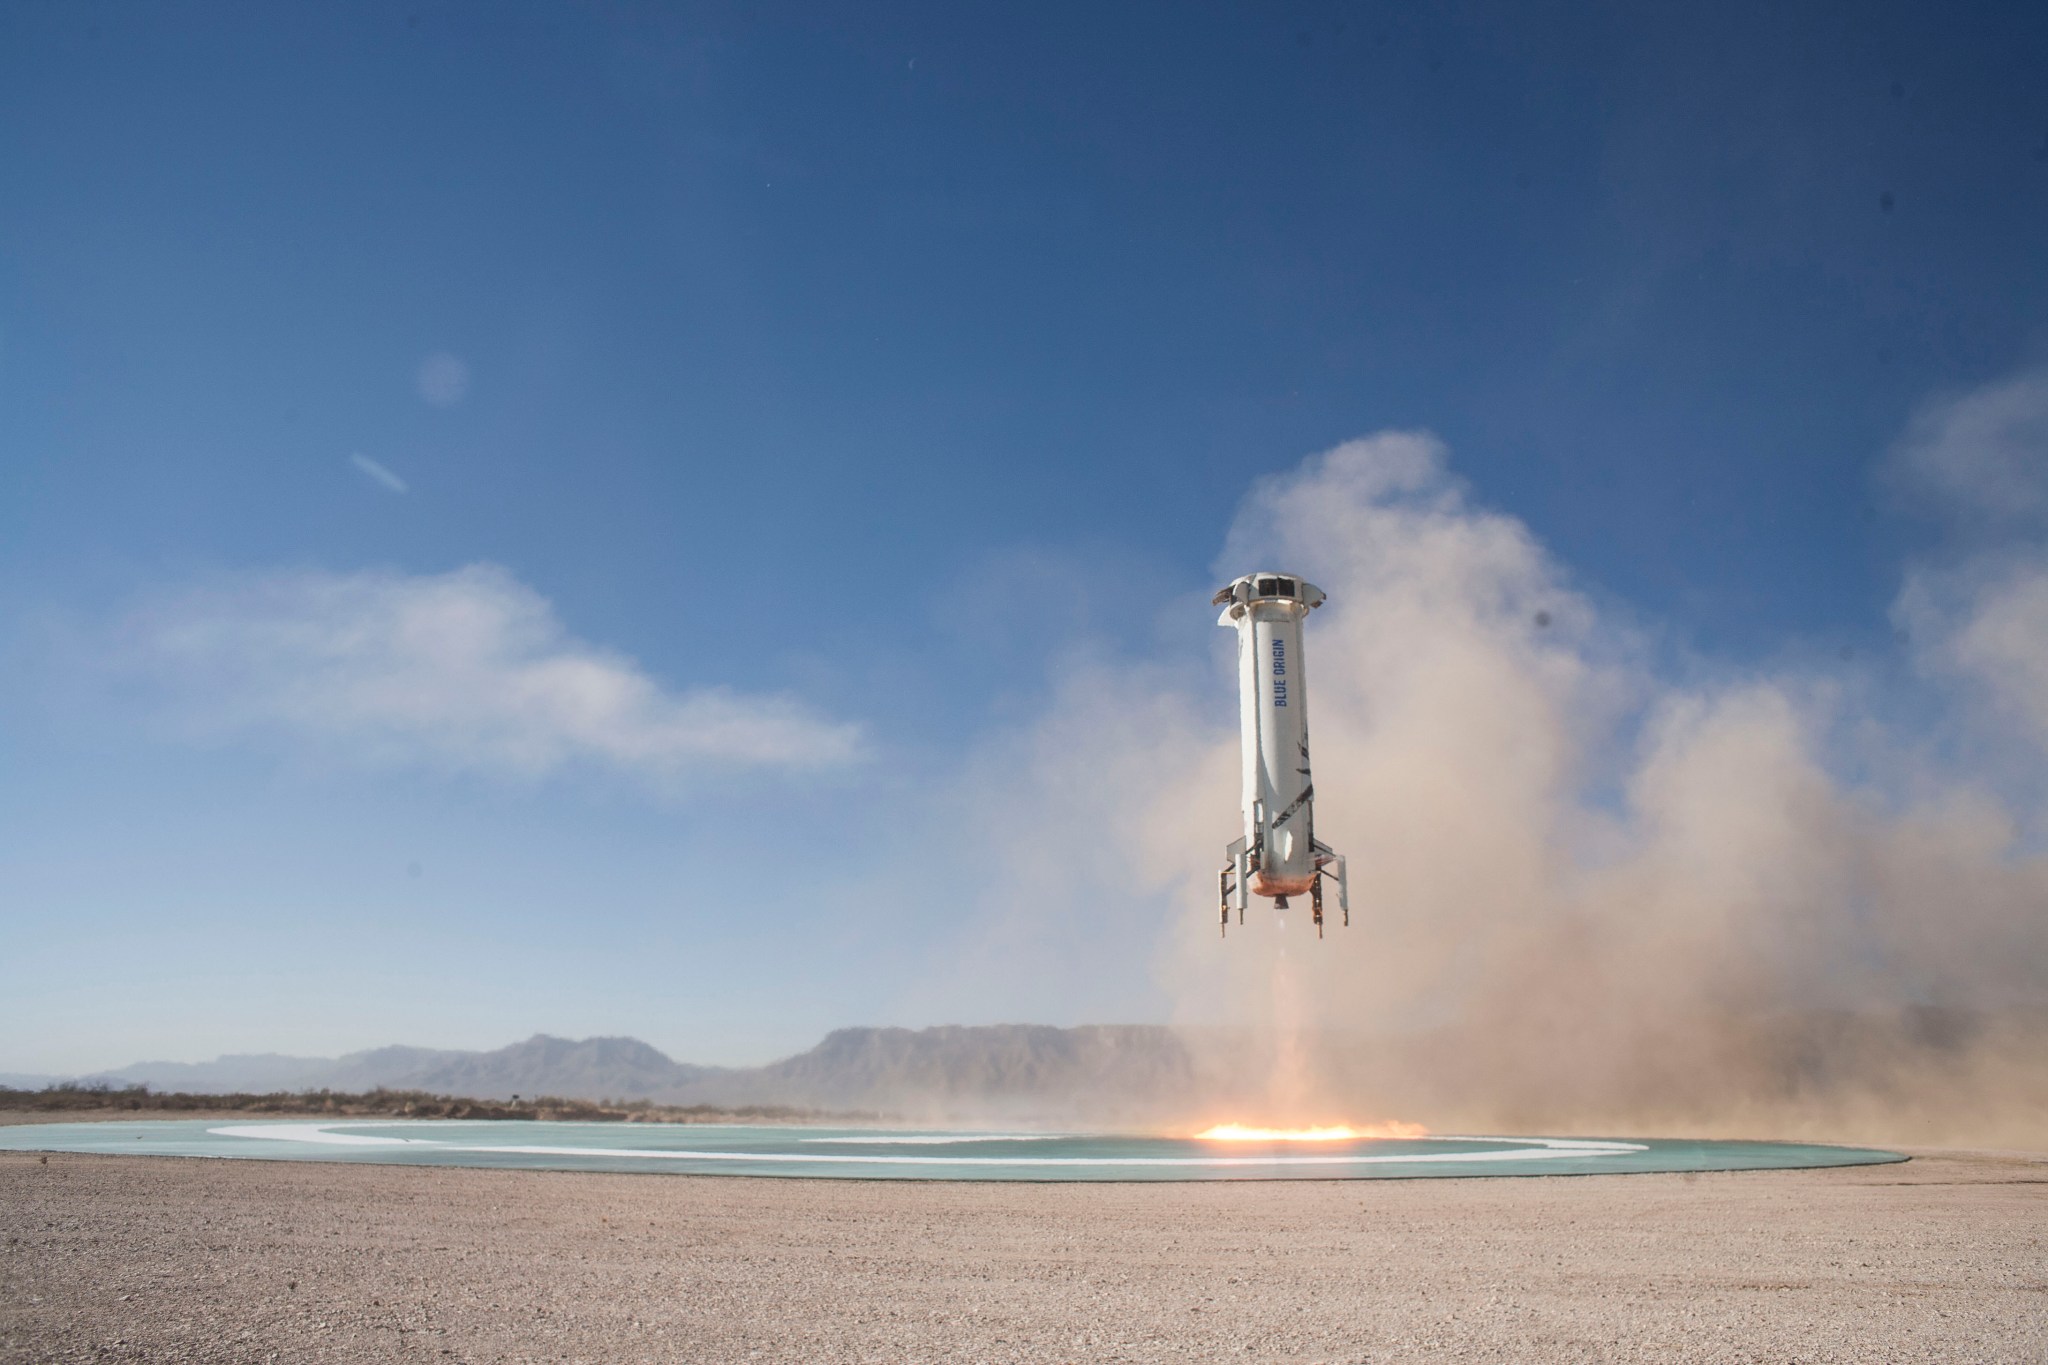 Blue Origin’s New Shepard booster rocket returned to its West Texas launch pad on Dec. 12 after completing a flight.